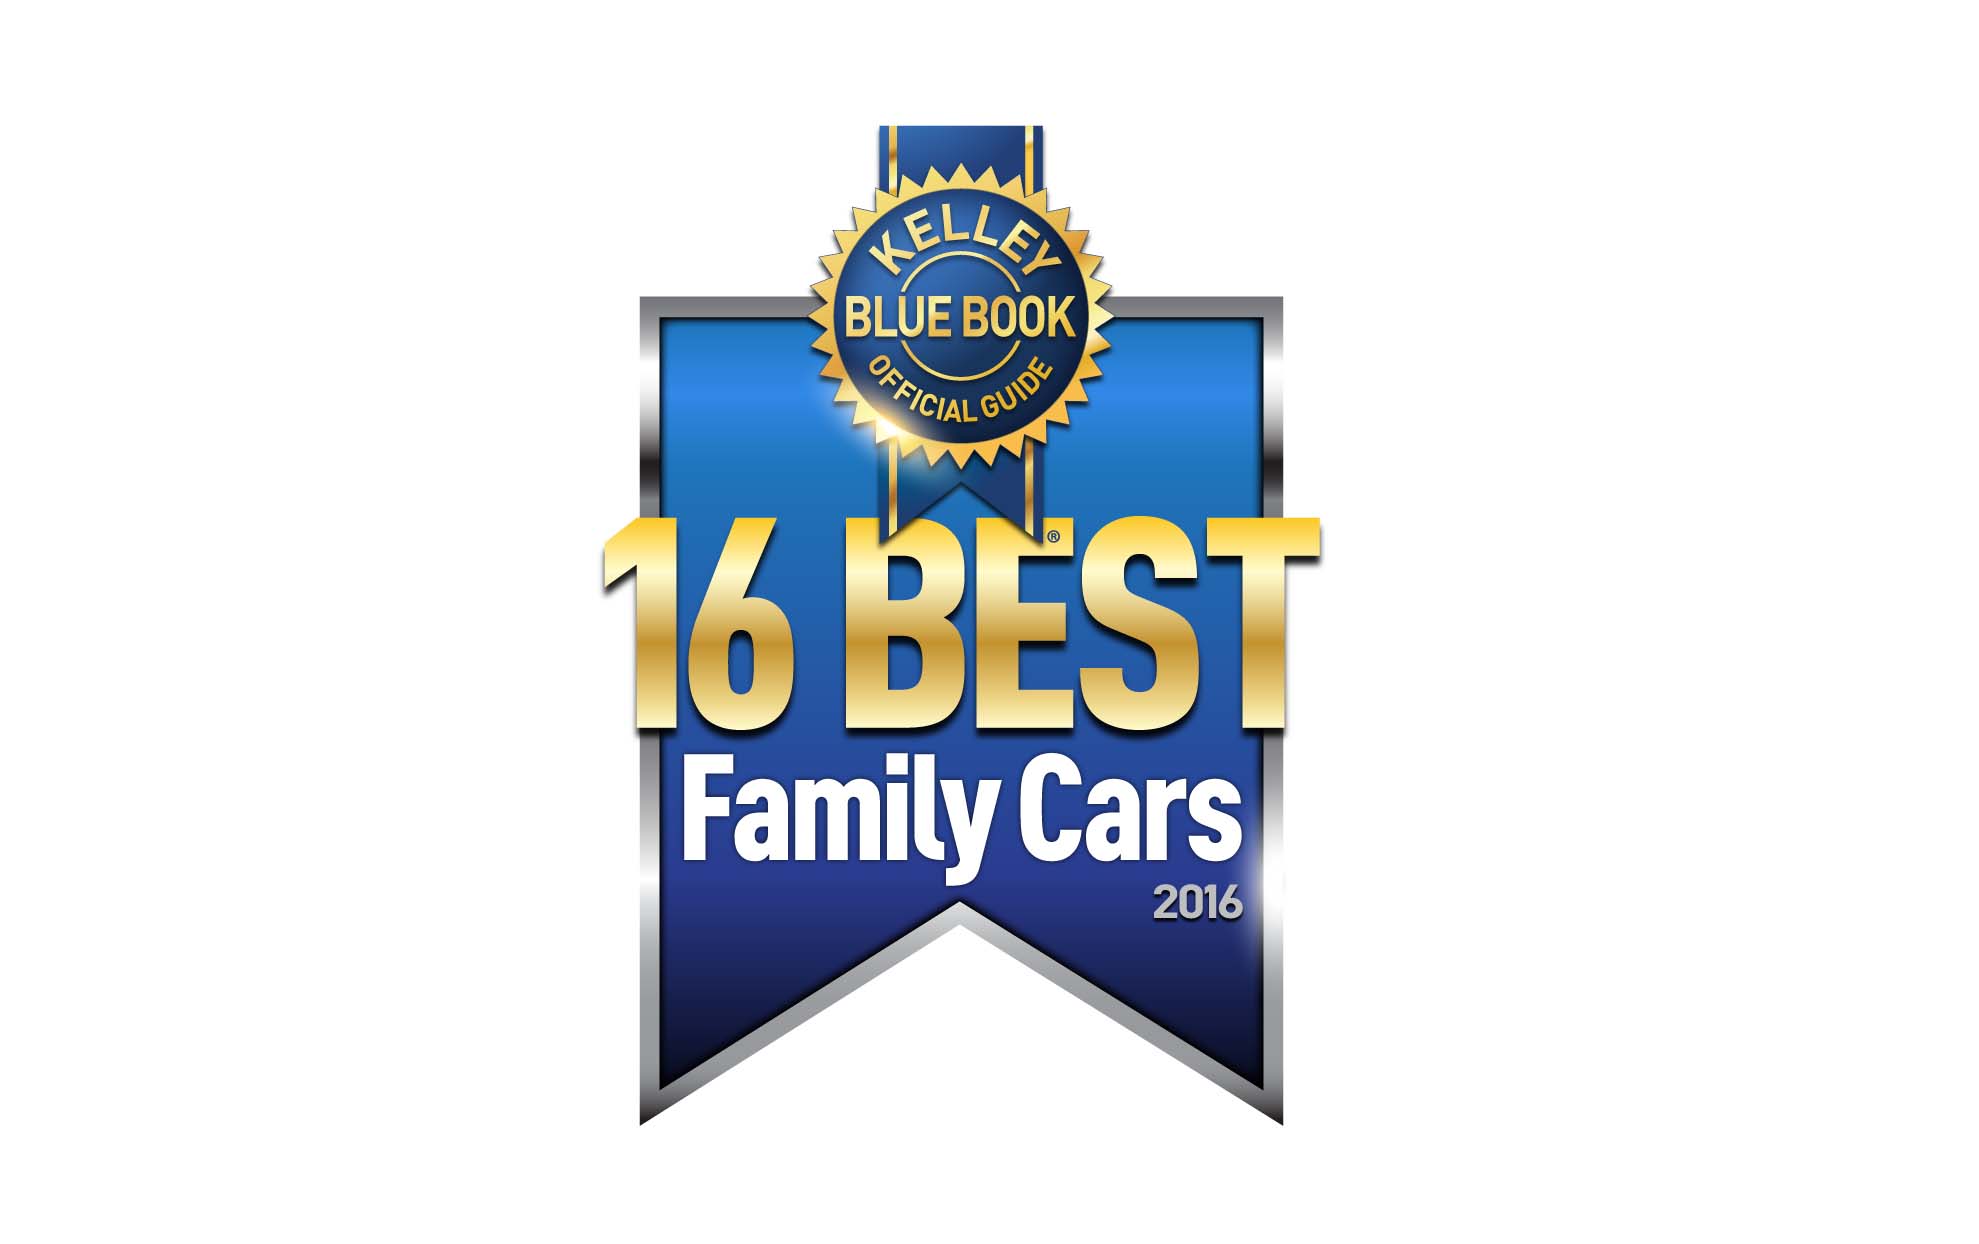 KELLEY BLUE BOOK NAMES 16 BEST FAMILY CARS OF 2016